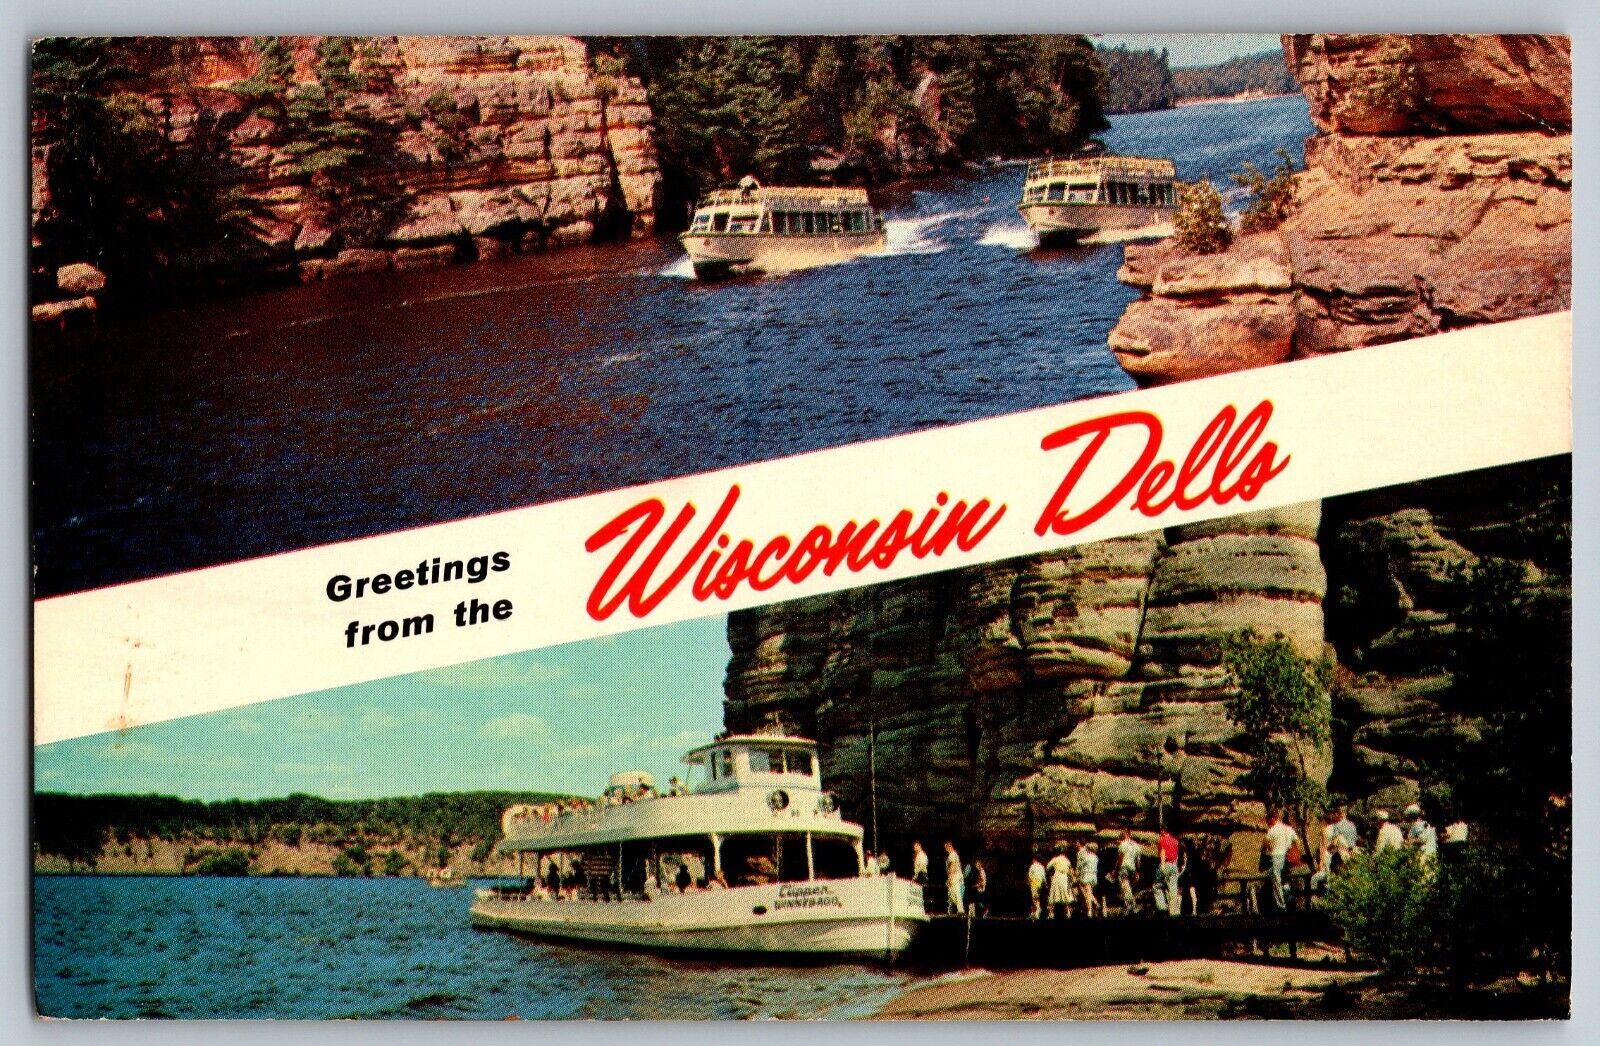 Wisconsin WI - Greetings from Wisconsin Dells - Ferry Boats - Vintage Postcard